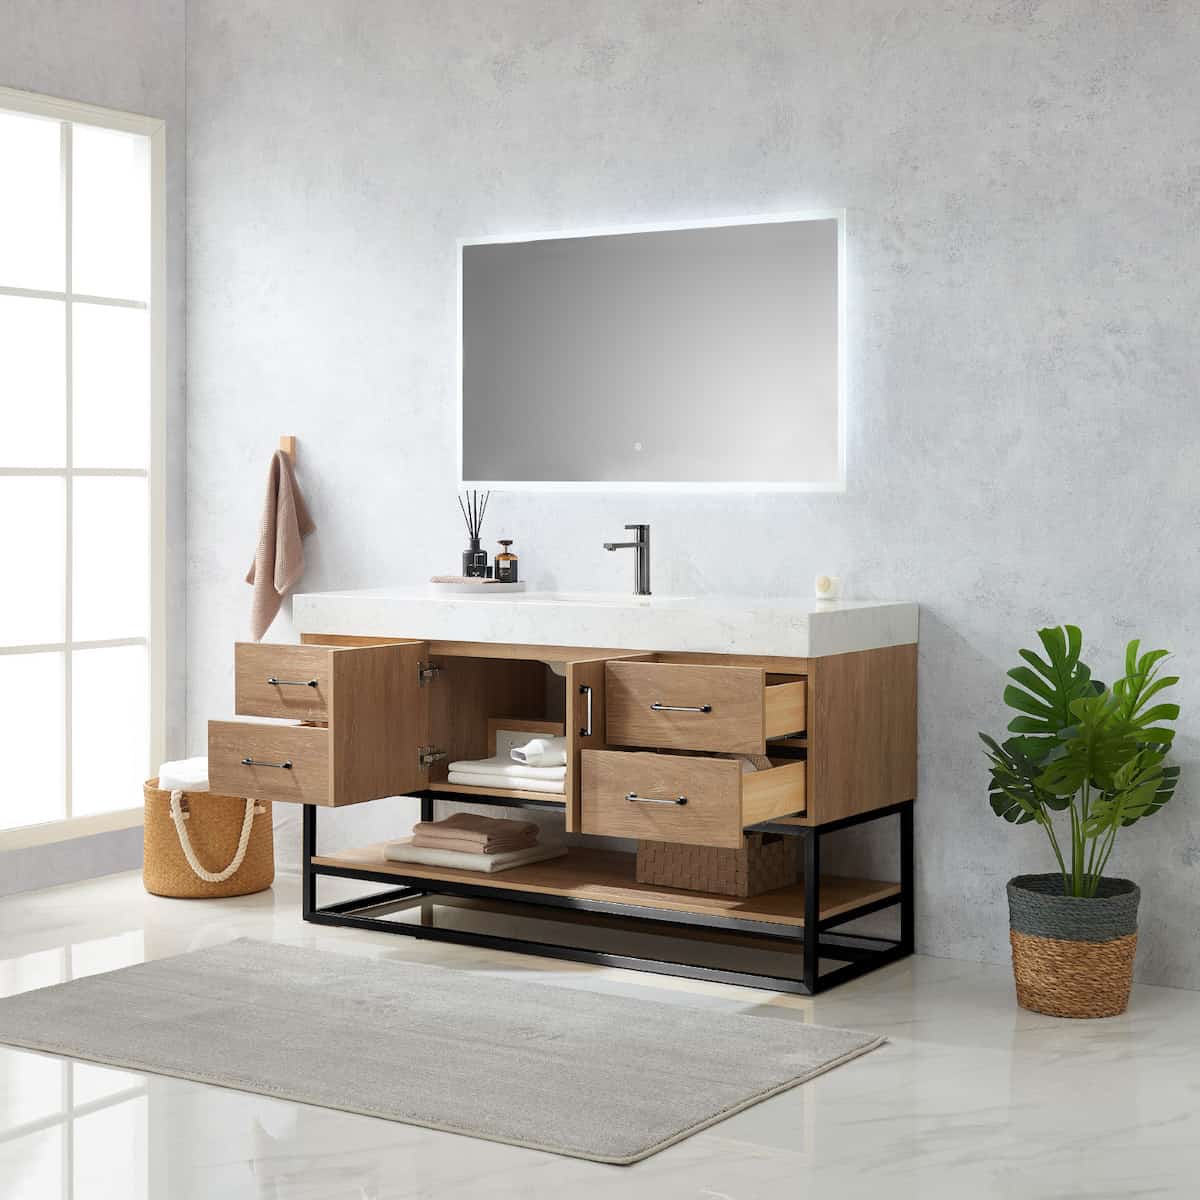 Vinnova Alistair 60 Inch Freestanding Single Vanity in North American Oak and Matte Black Frame with White Grain Stone Countertop With Mirror Inside 789060BS-NO-GW